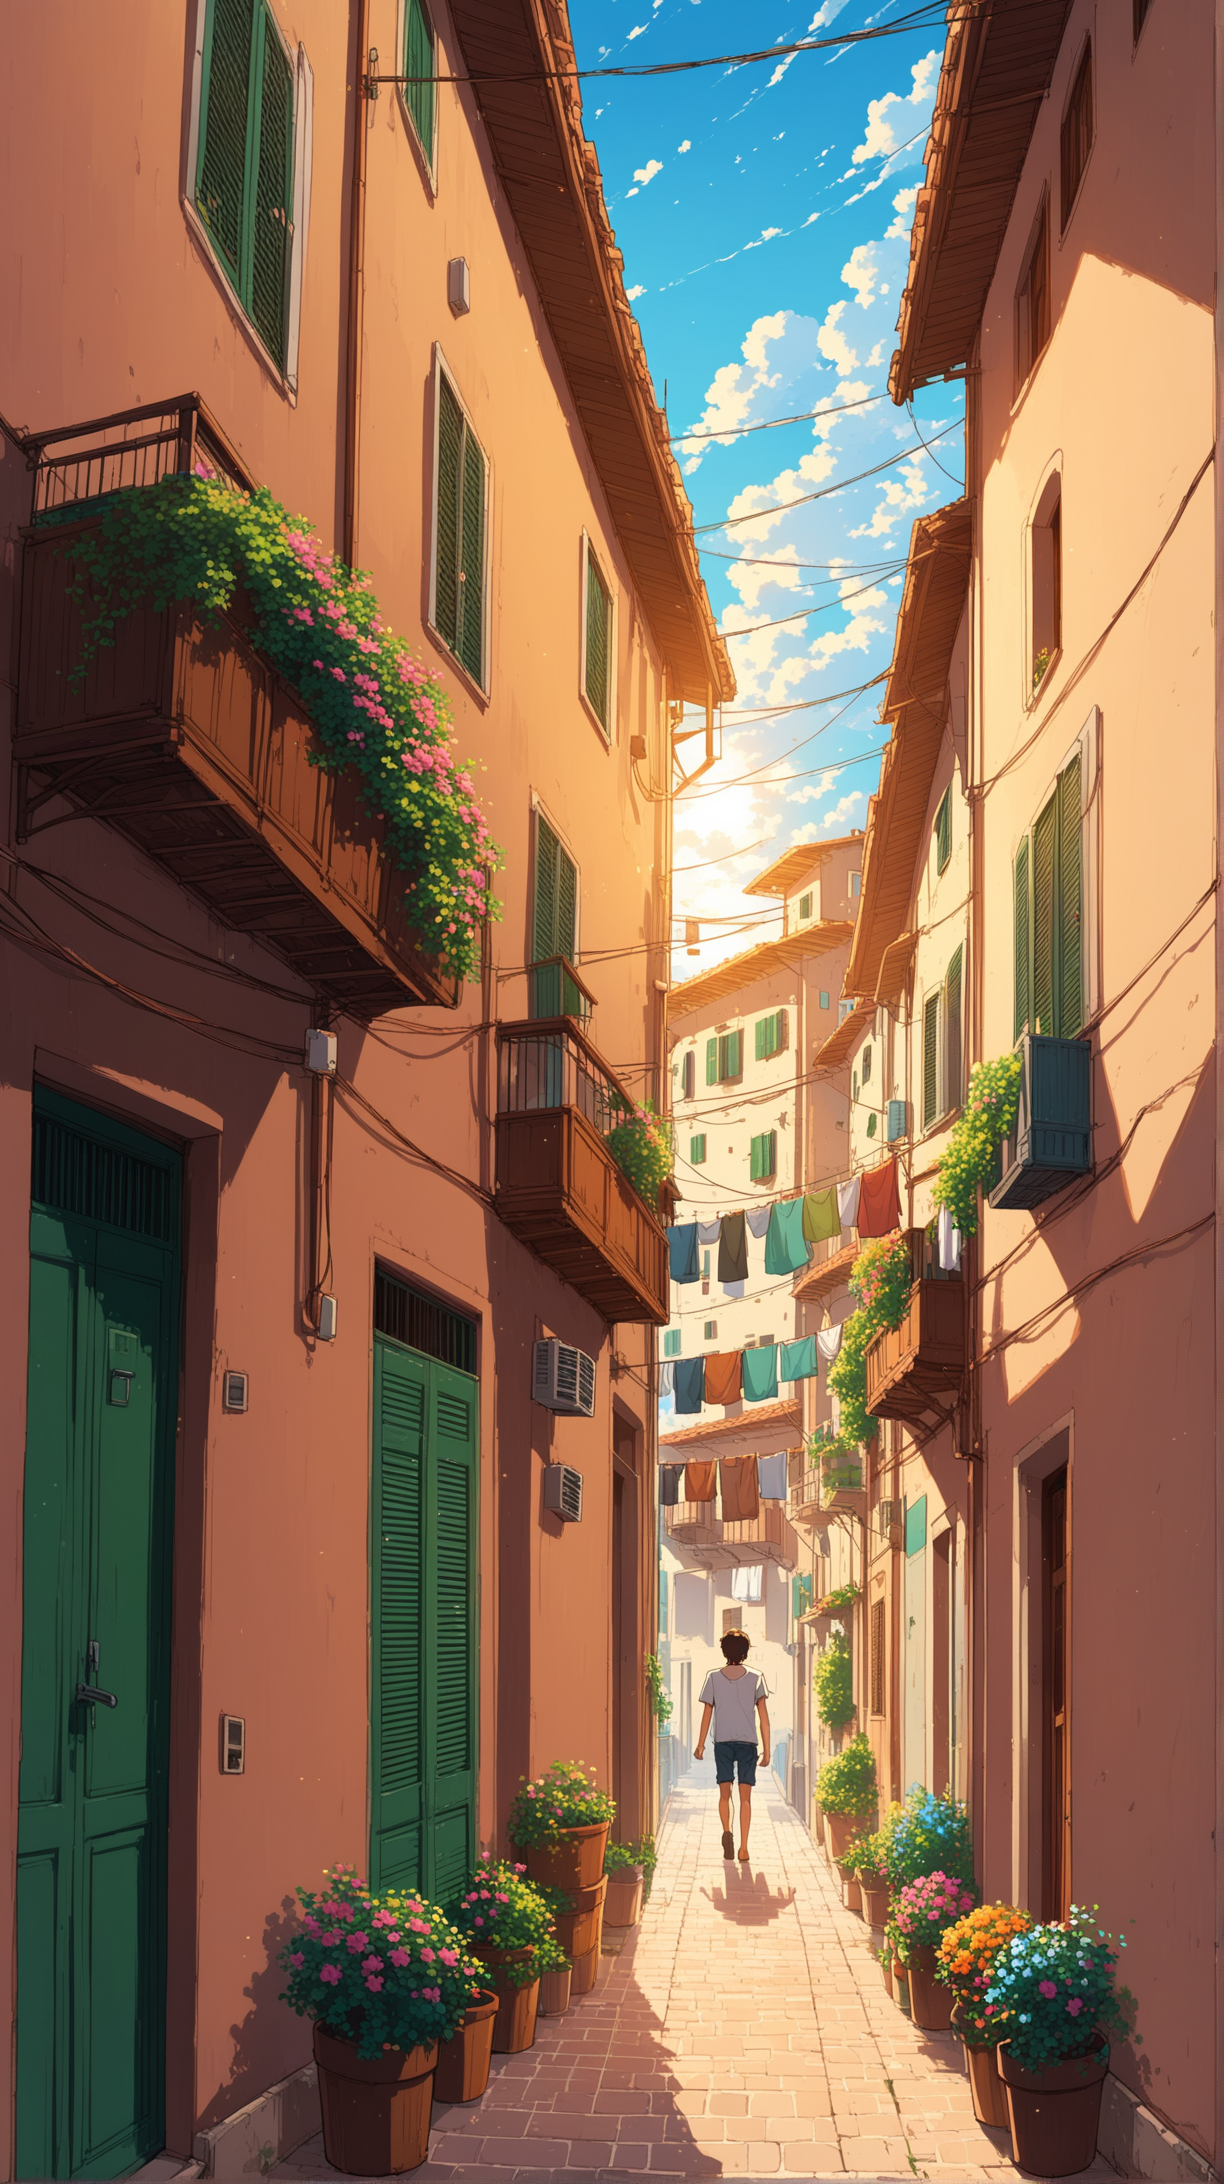 Children Walking Amidst Hanging Laundry in Italian Village Alley Anime Ghibli Style